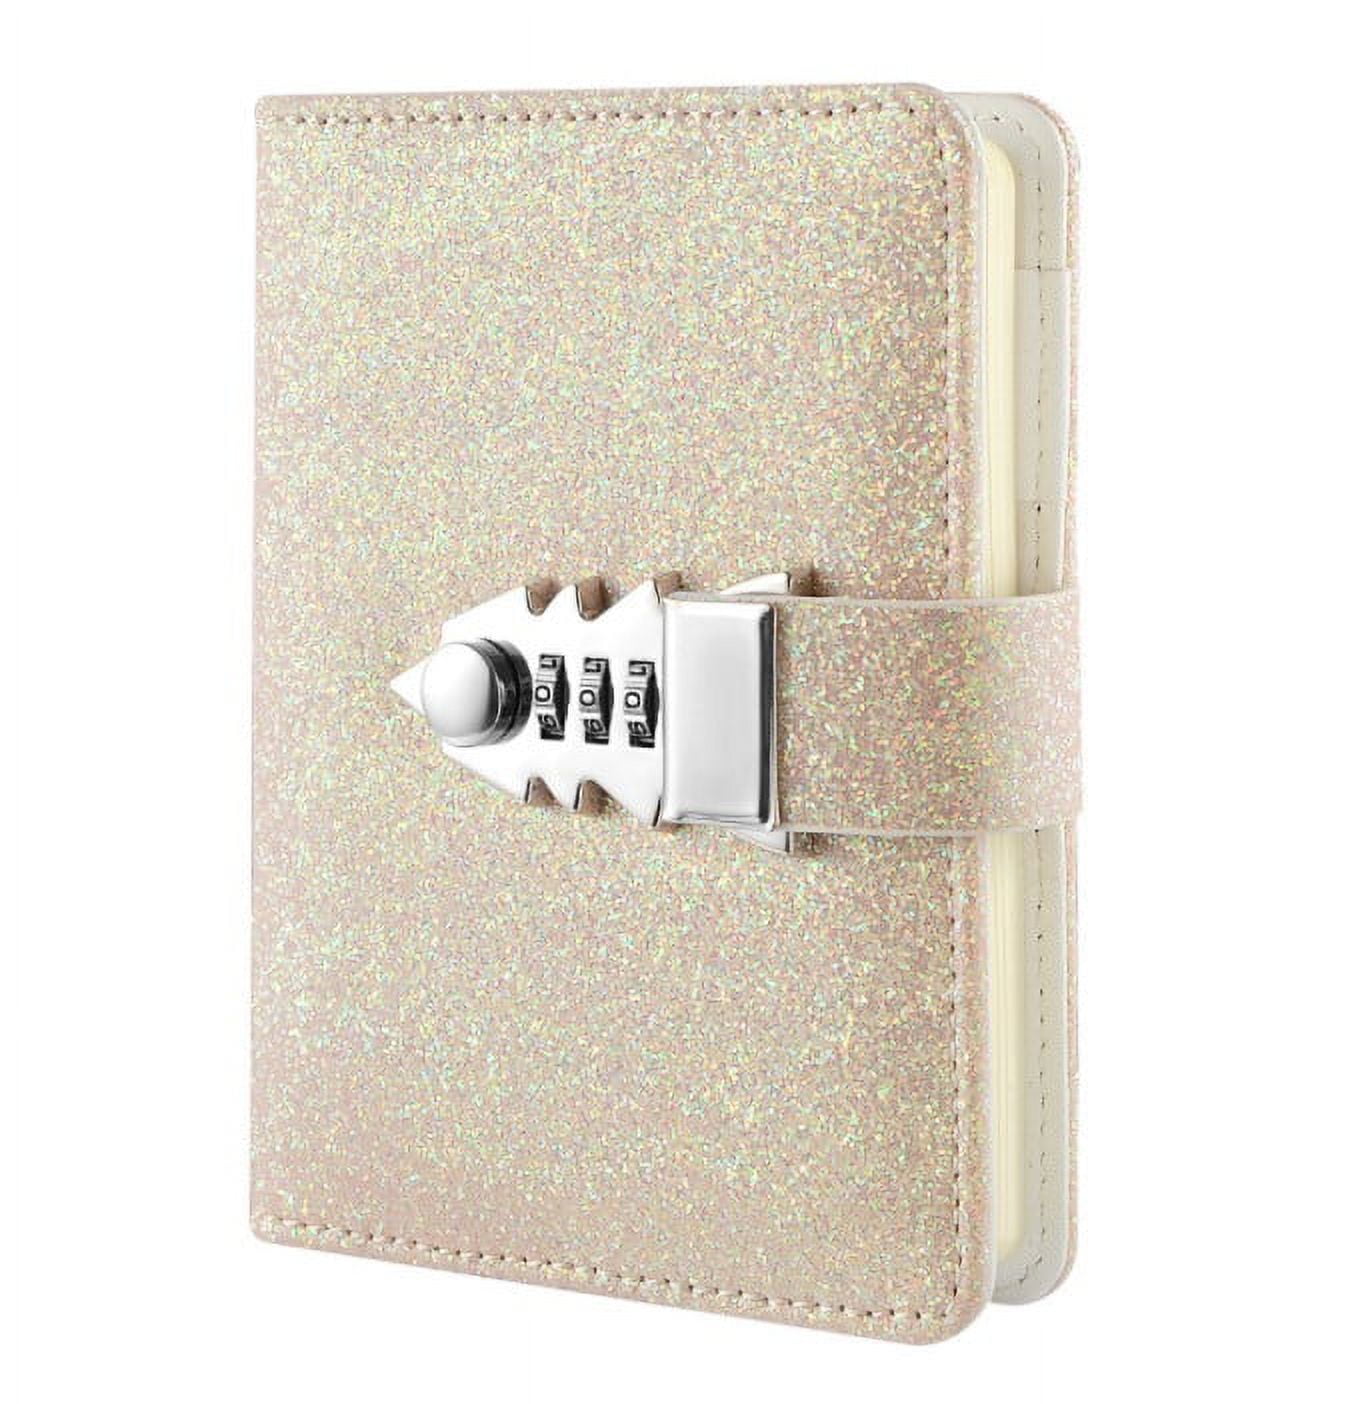 Diary With Lock And Key Heart Shaped Combination Lock Lock Journal For Girls Leather Jounal